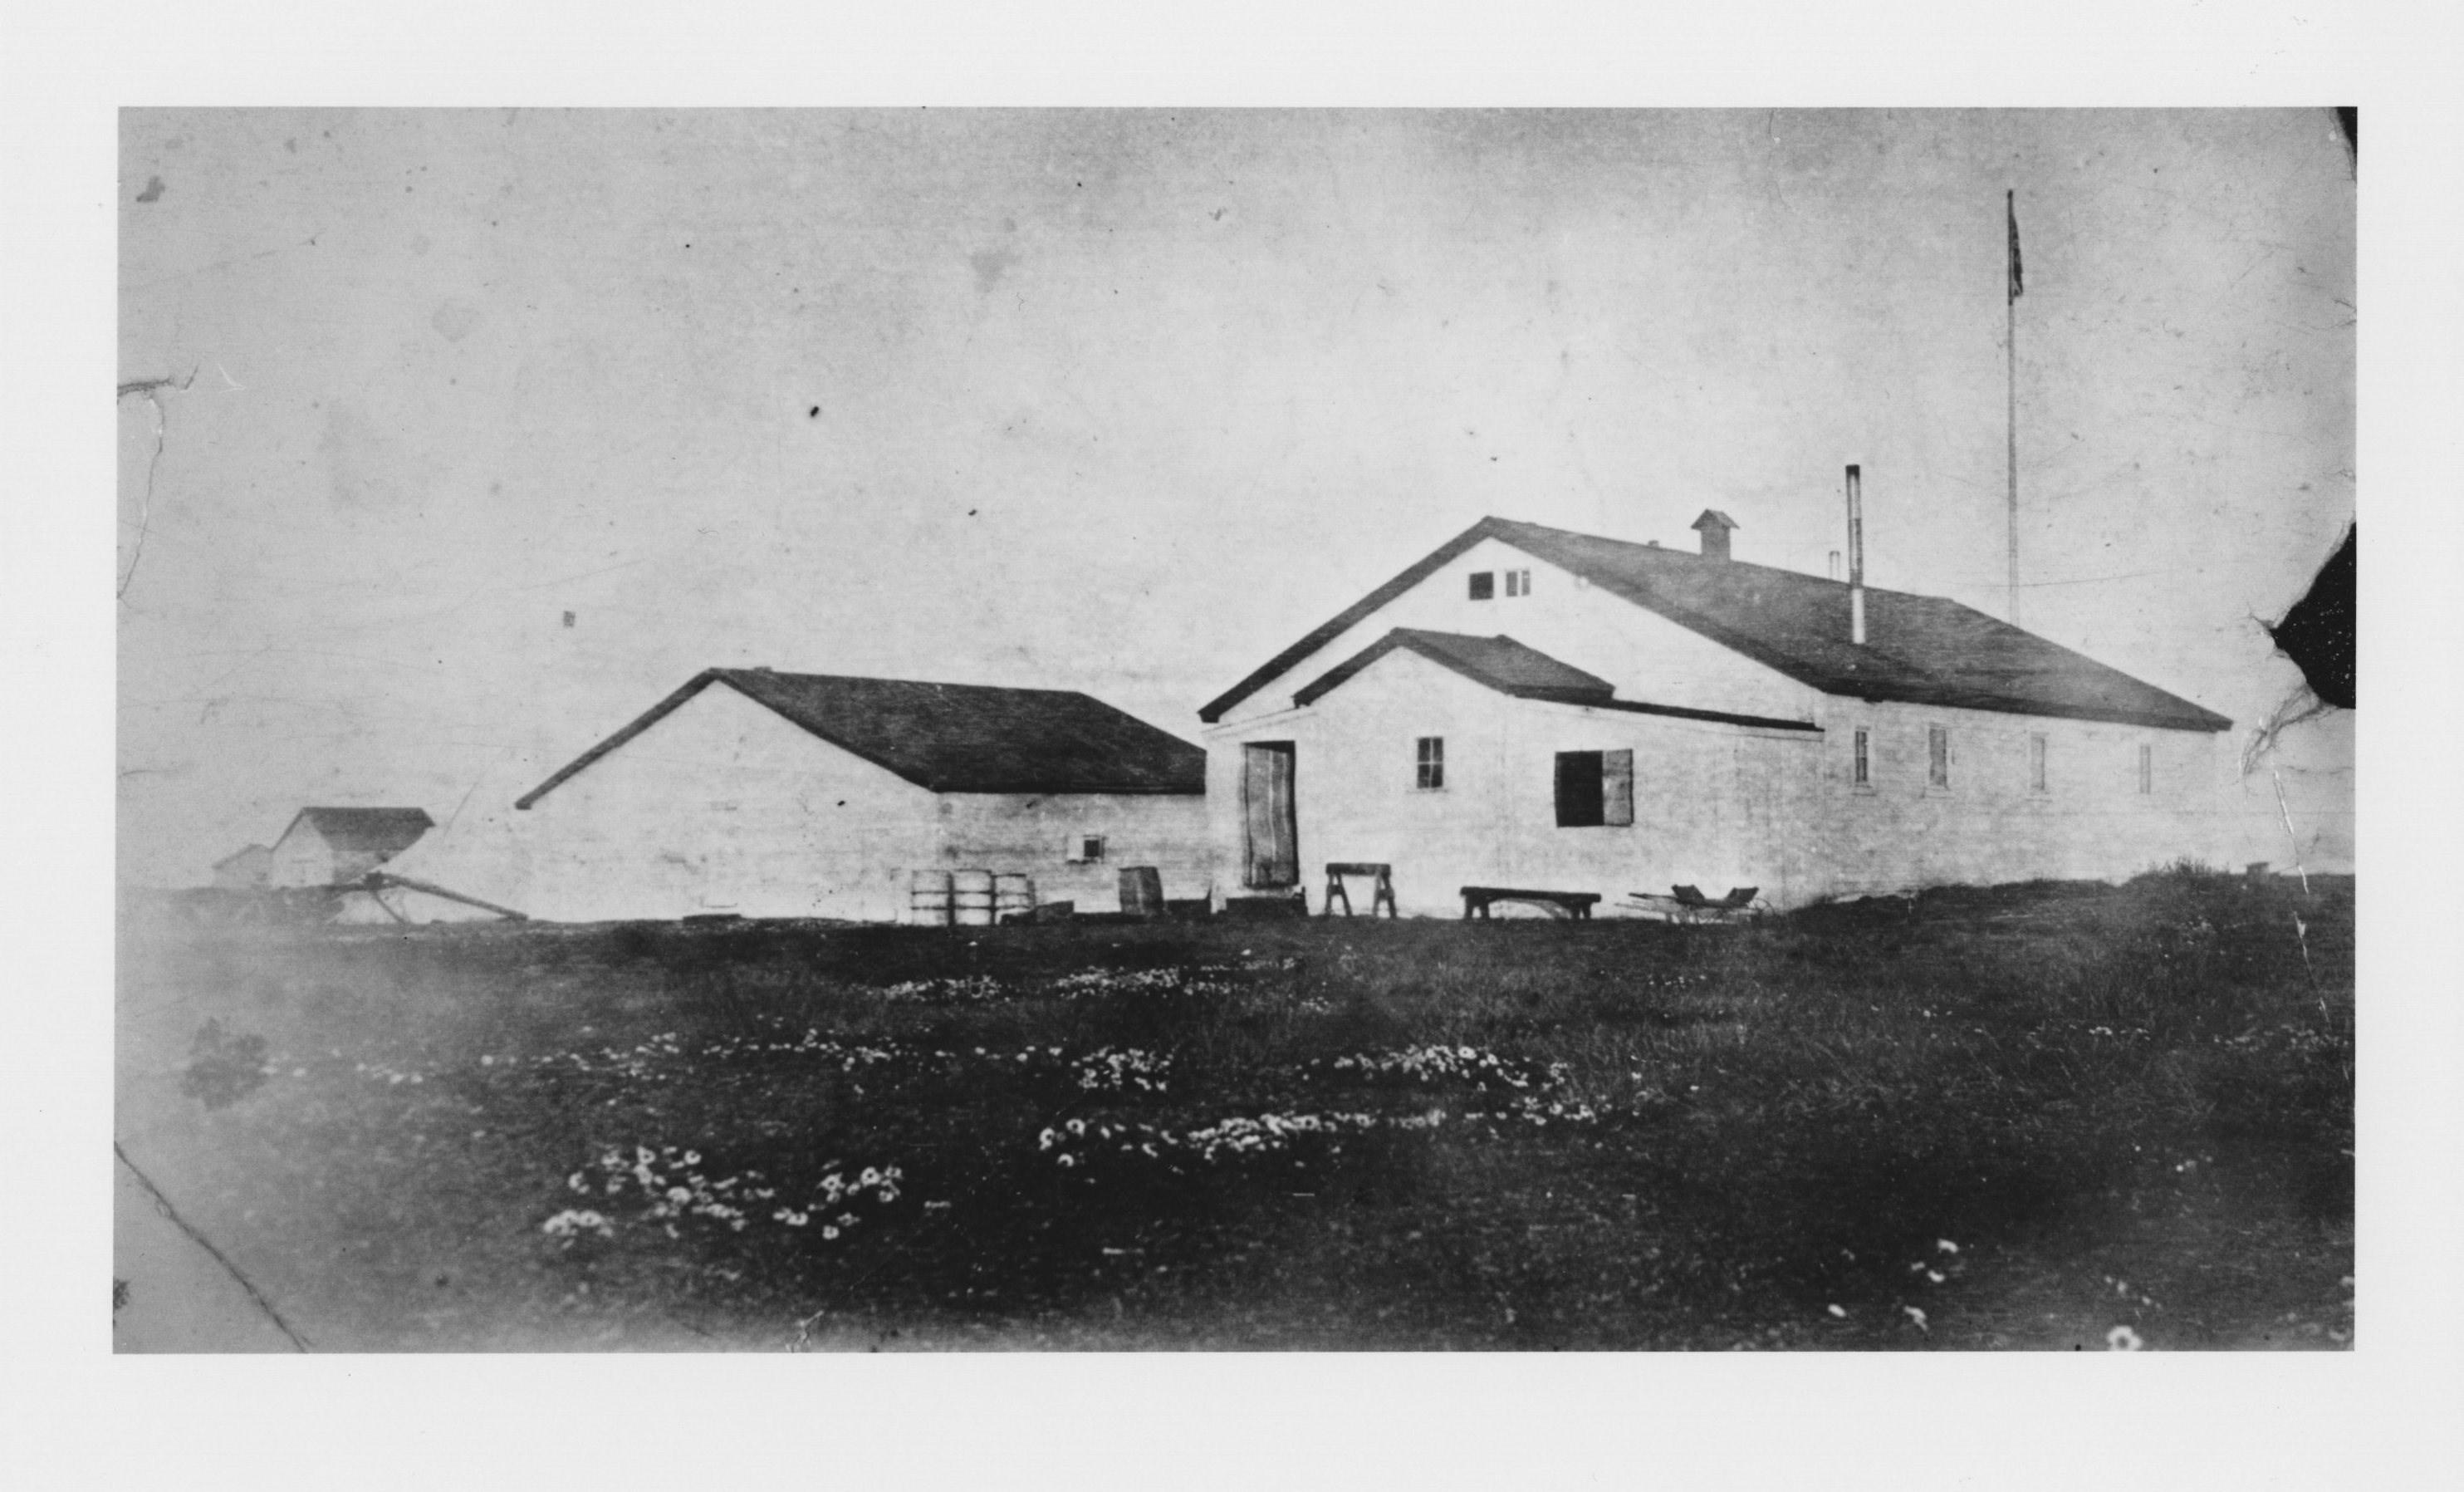 Photo Source: Inuvialuit Cultural Centre Digital Library. Inglangasuk, Lennie, “RCMP Building,” Inuvialuit Cultural Centre Digital Library, accessed April 21, 2020, https://inuvialuitdigitallibrary.ca/items/show/3398.